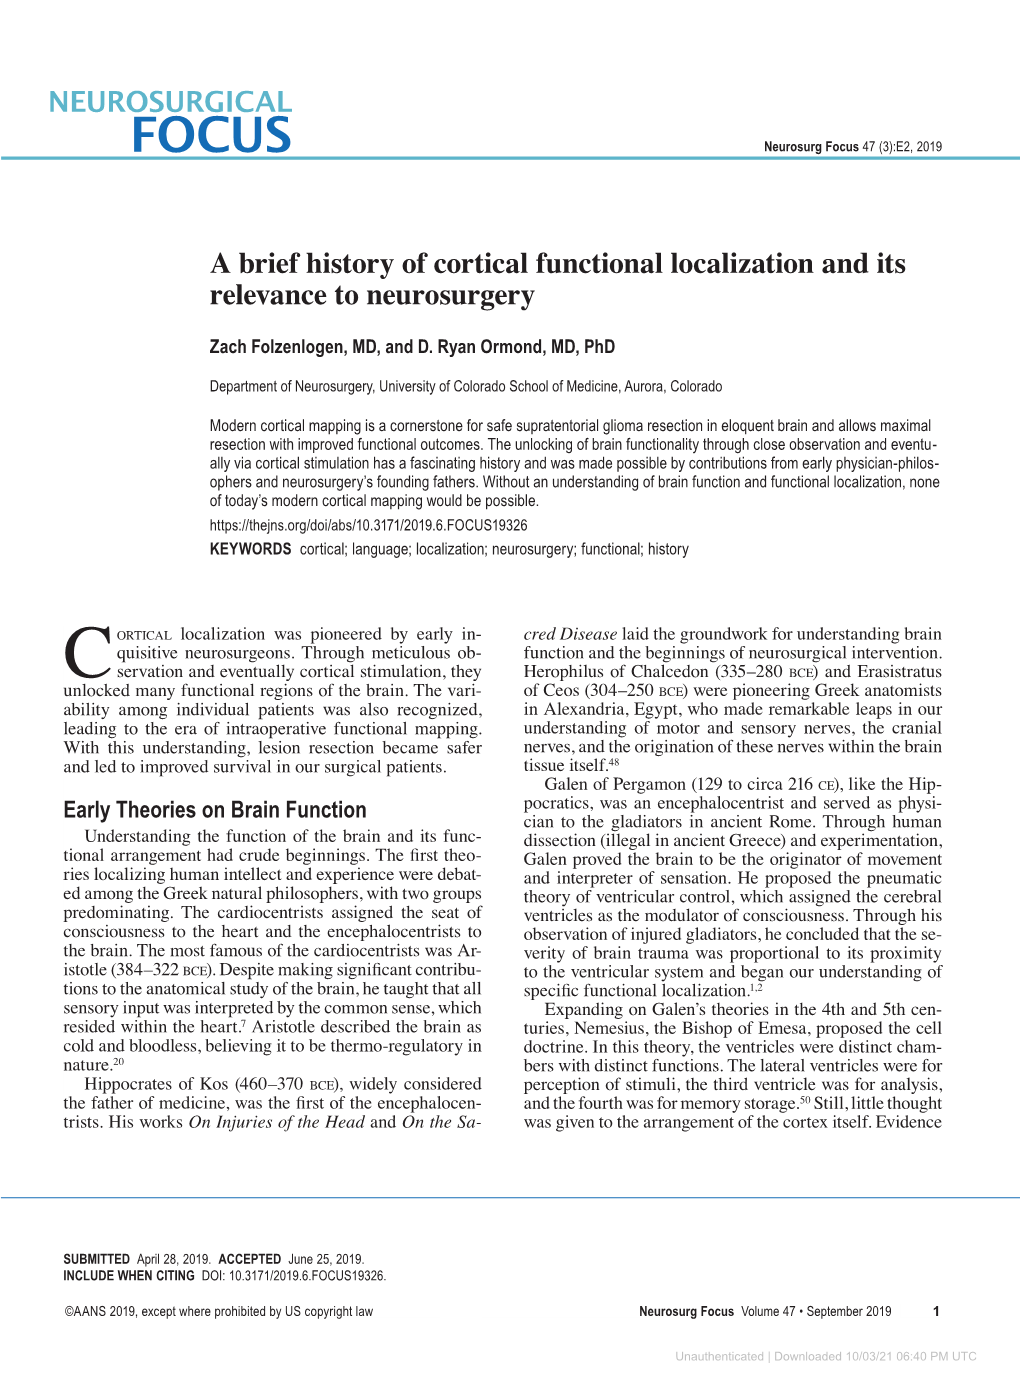 A Brief History of Cortical Functional Localization and Its Relevance to Neurosurgery